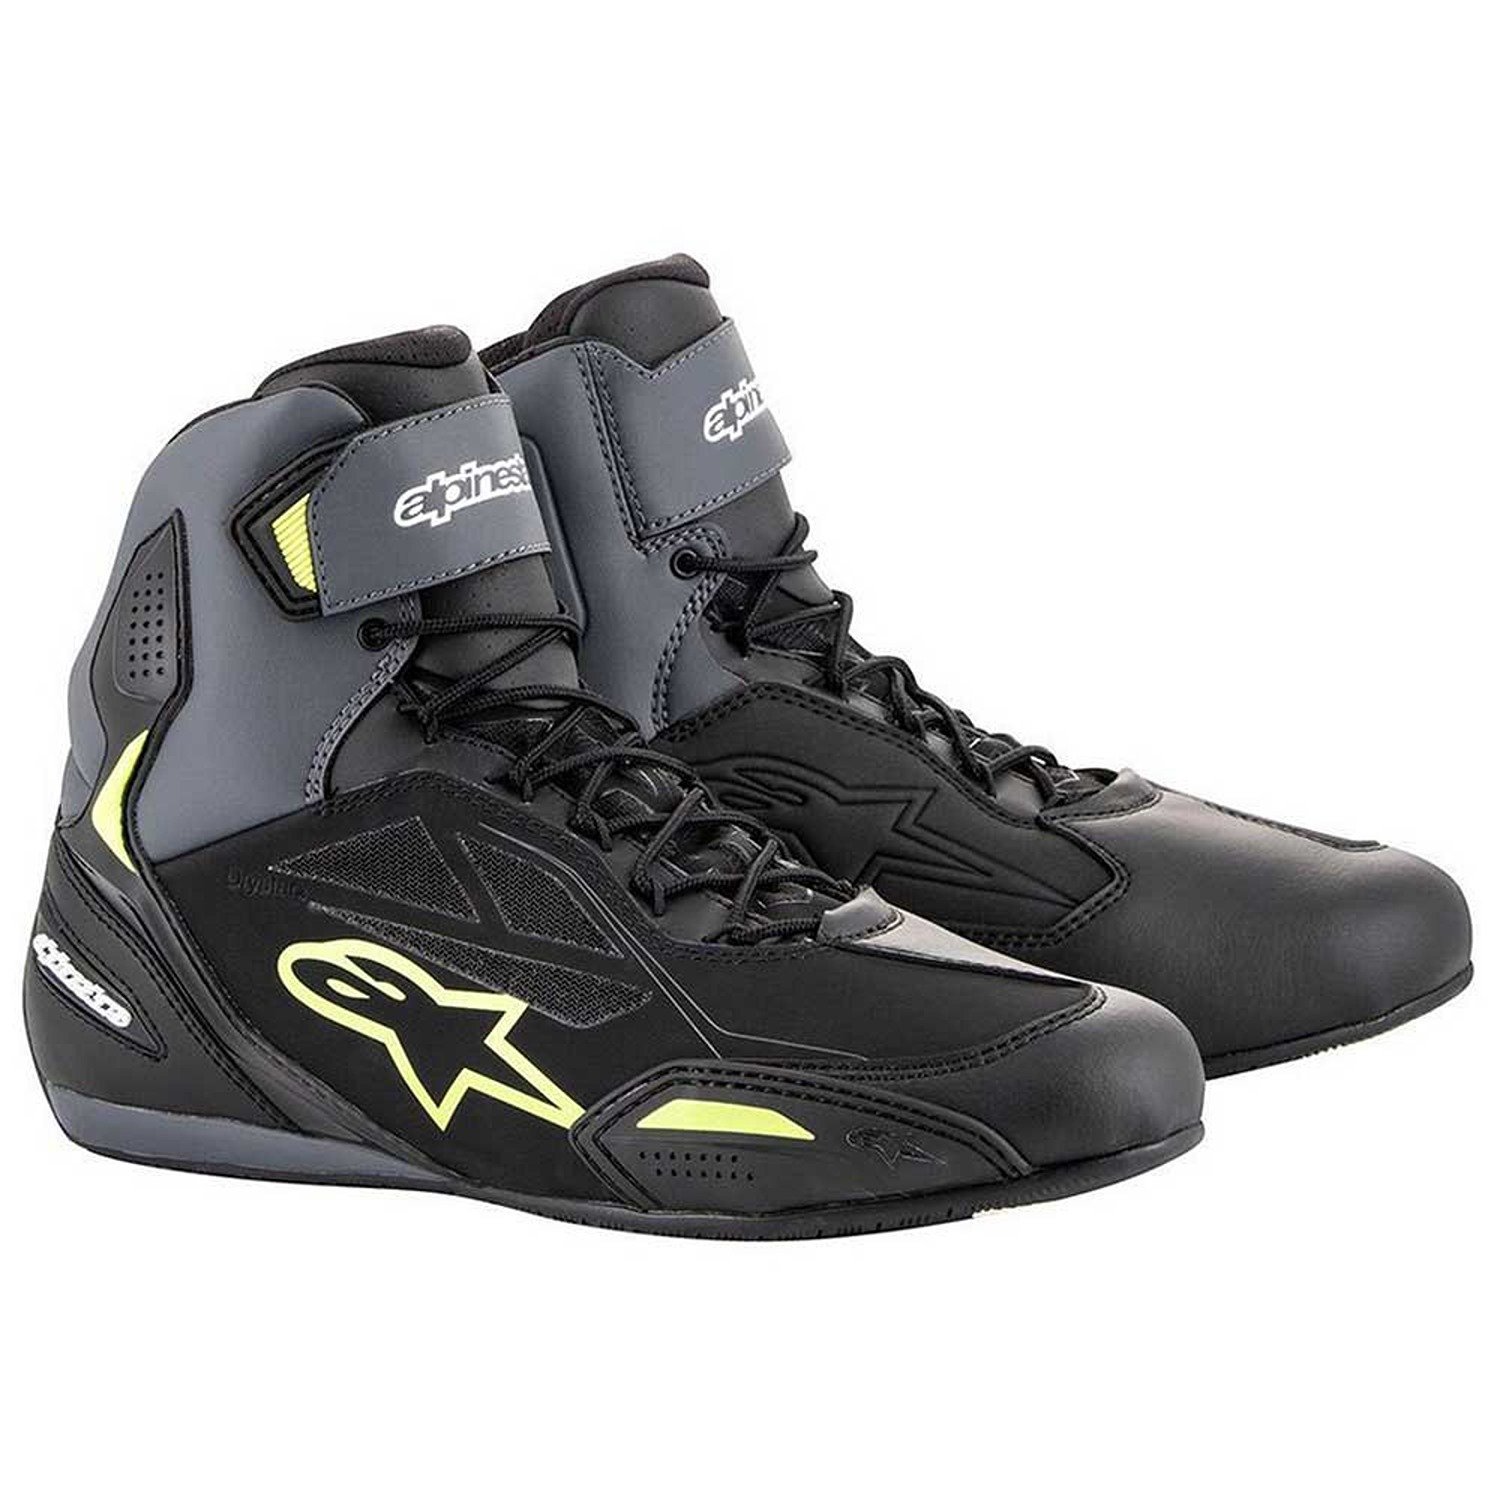 Image of EU Alpinestars Faster-3 Shoes Black Yellow Fluo Taille US 115